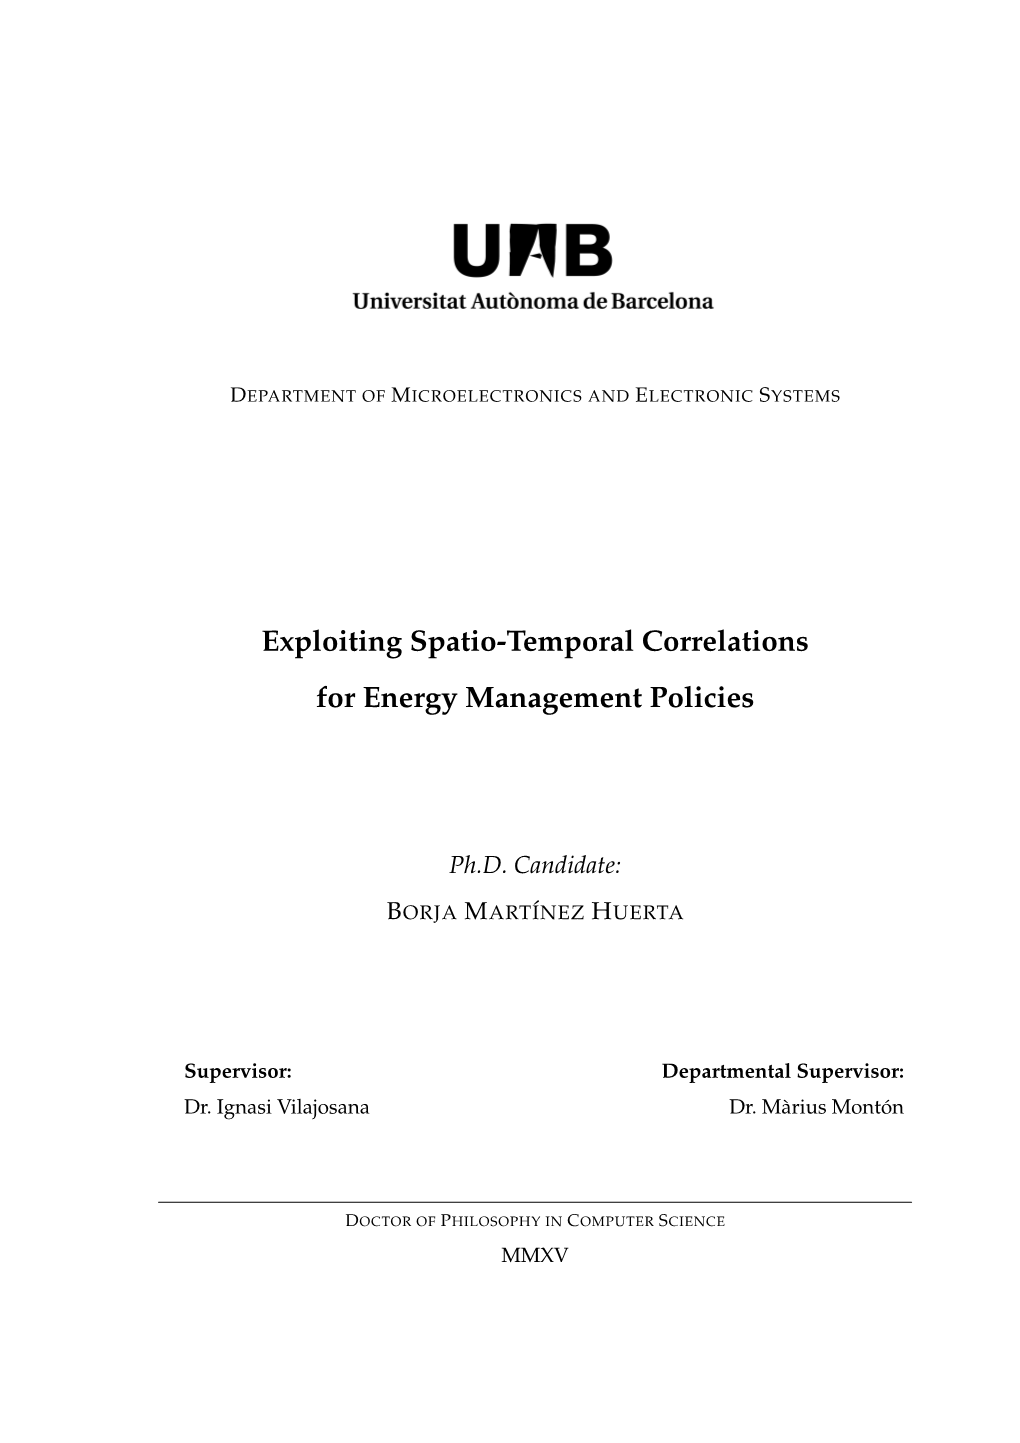 Exploiting Spatio-Temporal Correlations for Energy Management Policies